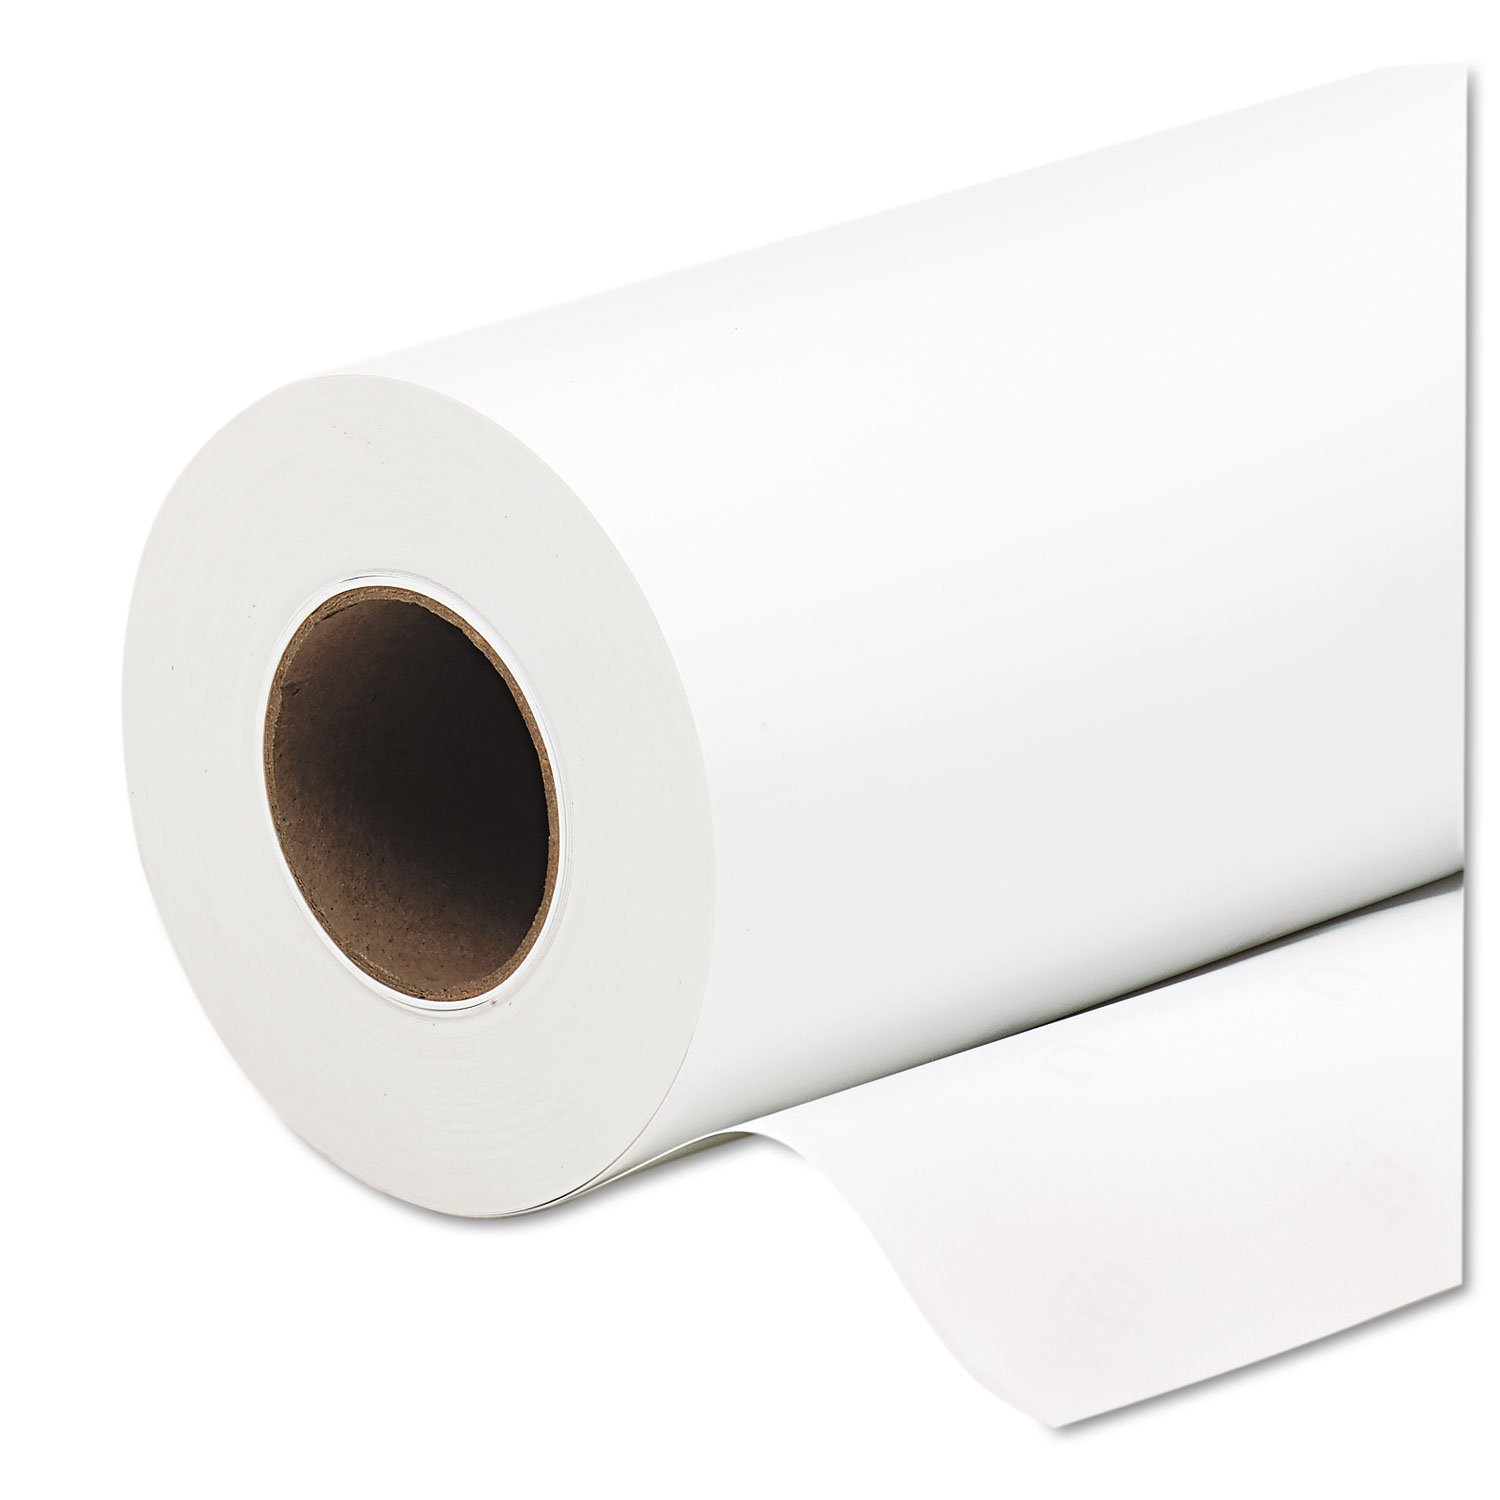  HP Q8918A Everyday Pigment Ink Photo Paper Roll, 9.1 mil, 42 x 100 ft, Glossy White (HEWQ8918A) 